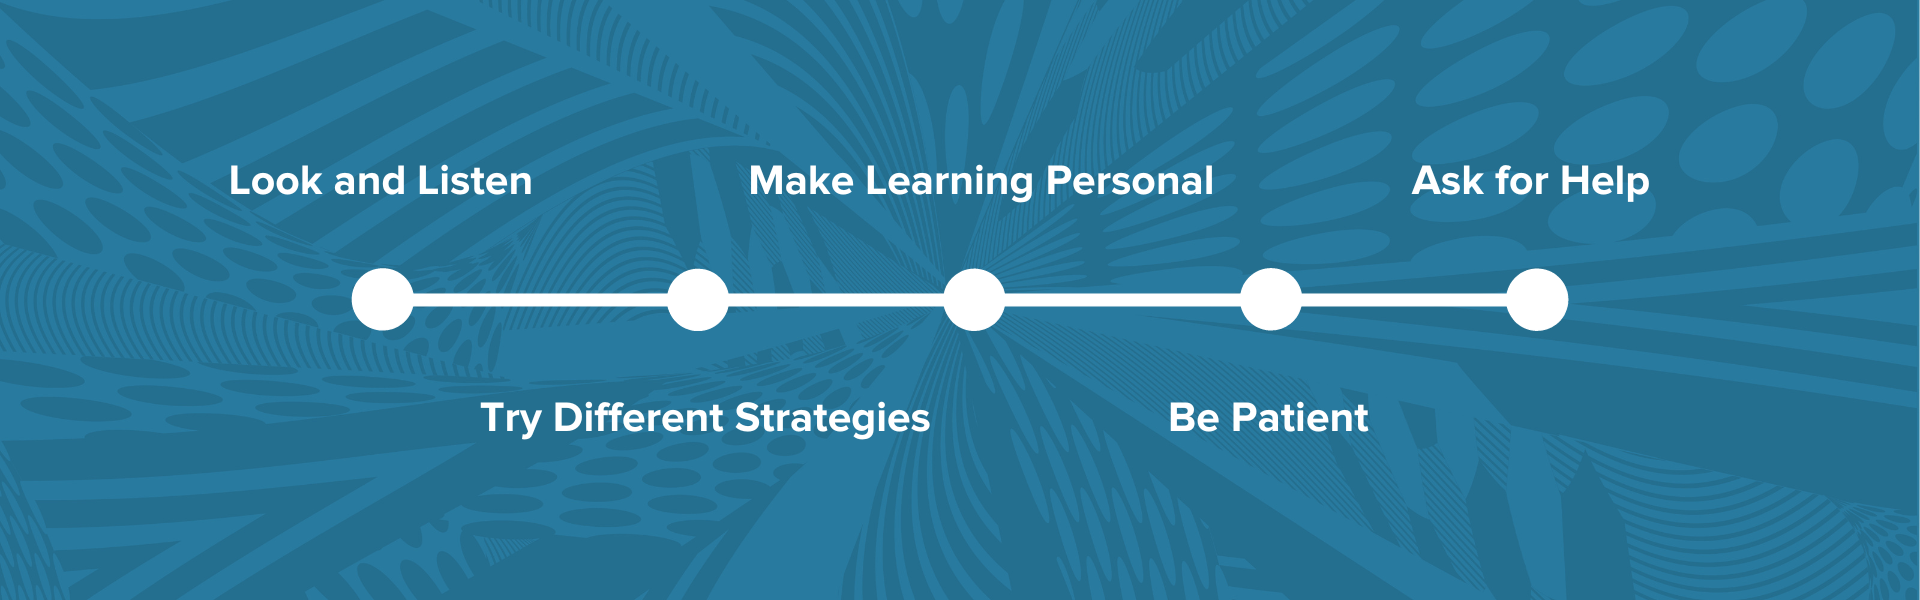 look and listen, try different strategies, make learning personal, be patient, ask for help points on a timeline